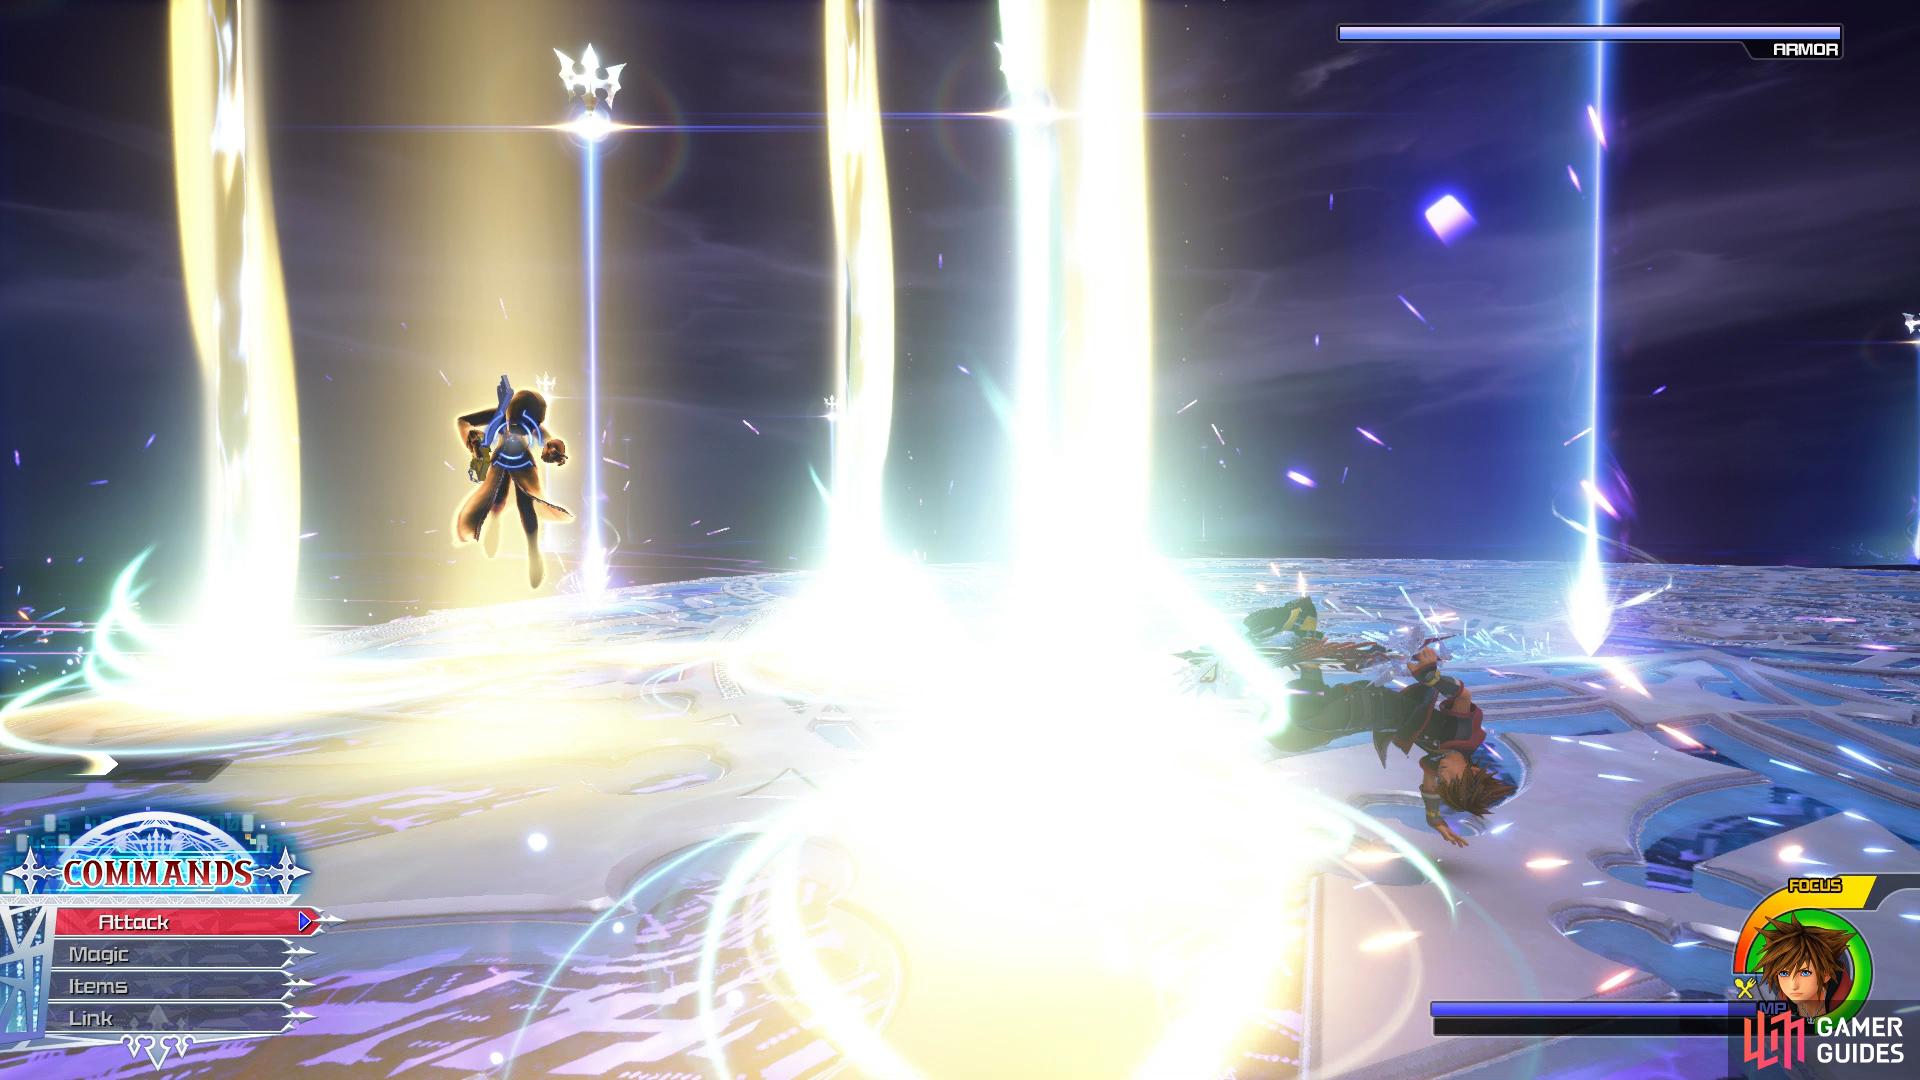 Xion leaves Shockwaves behind when she has Armor